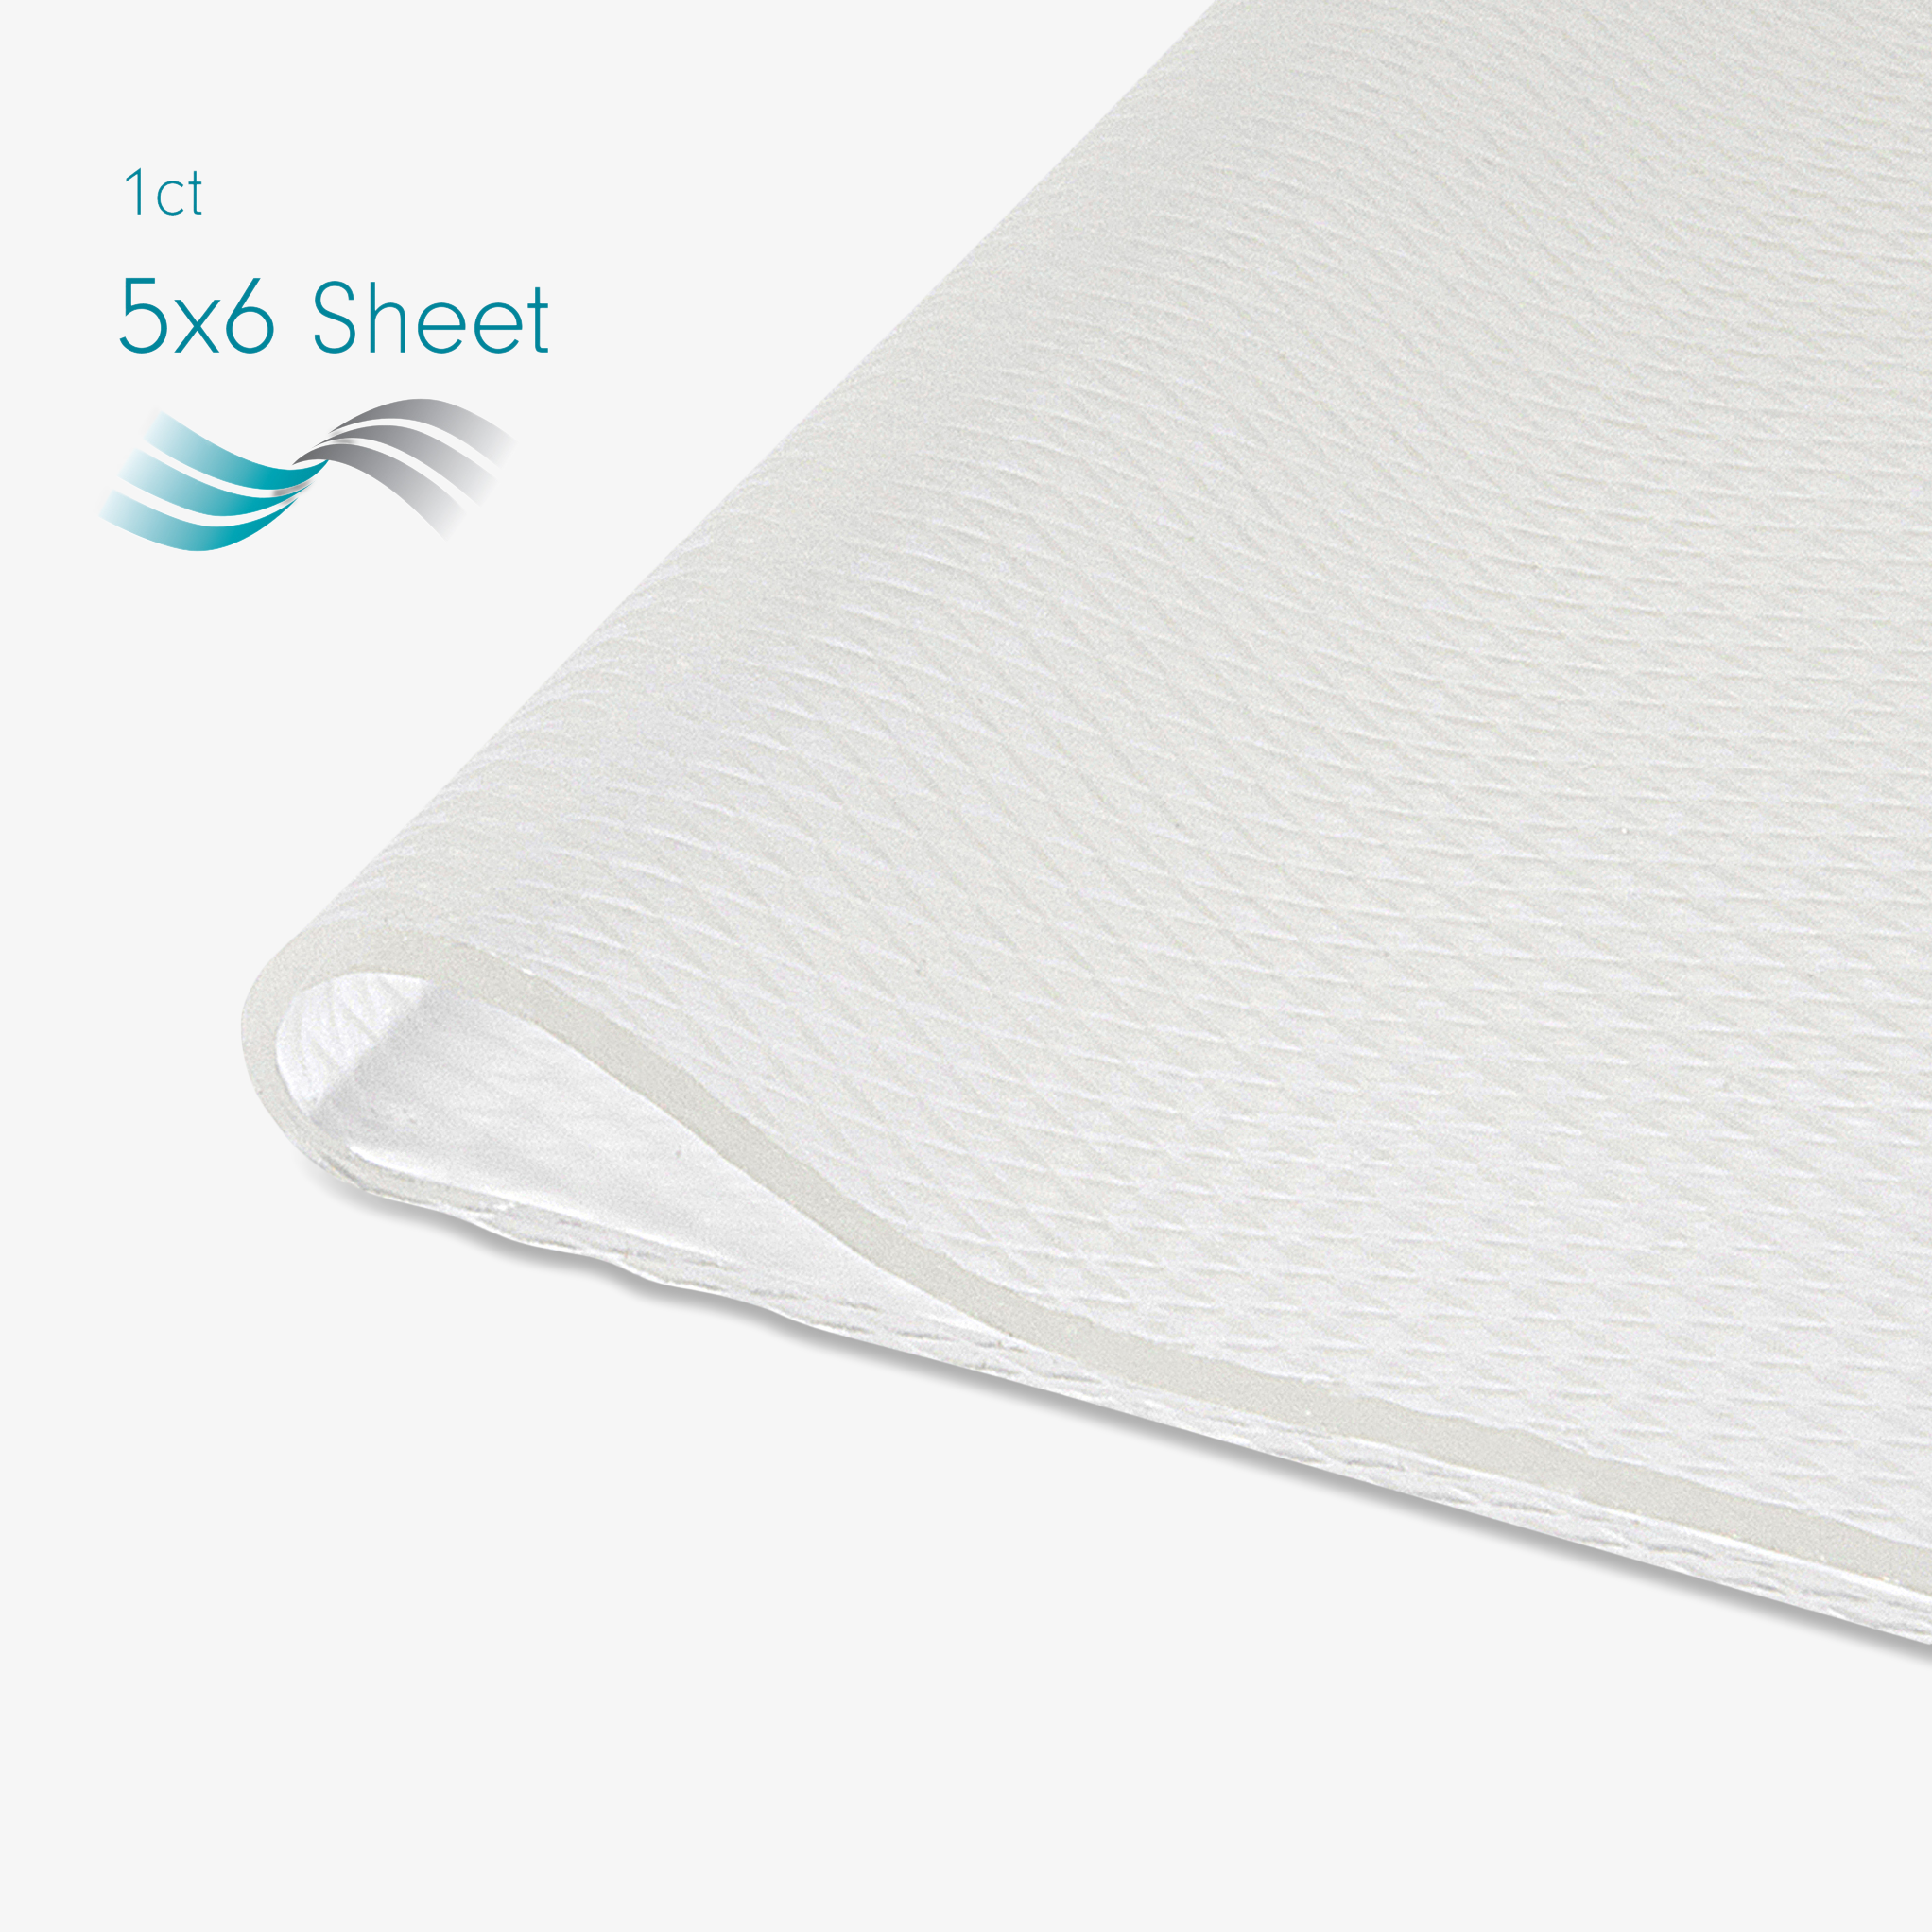 Advanced Medical-Grade Silicone Sheet 5" x 6" 1 count| clear